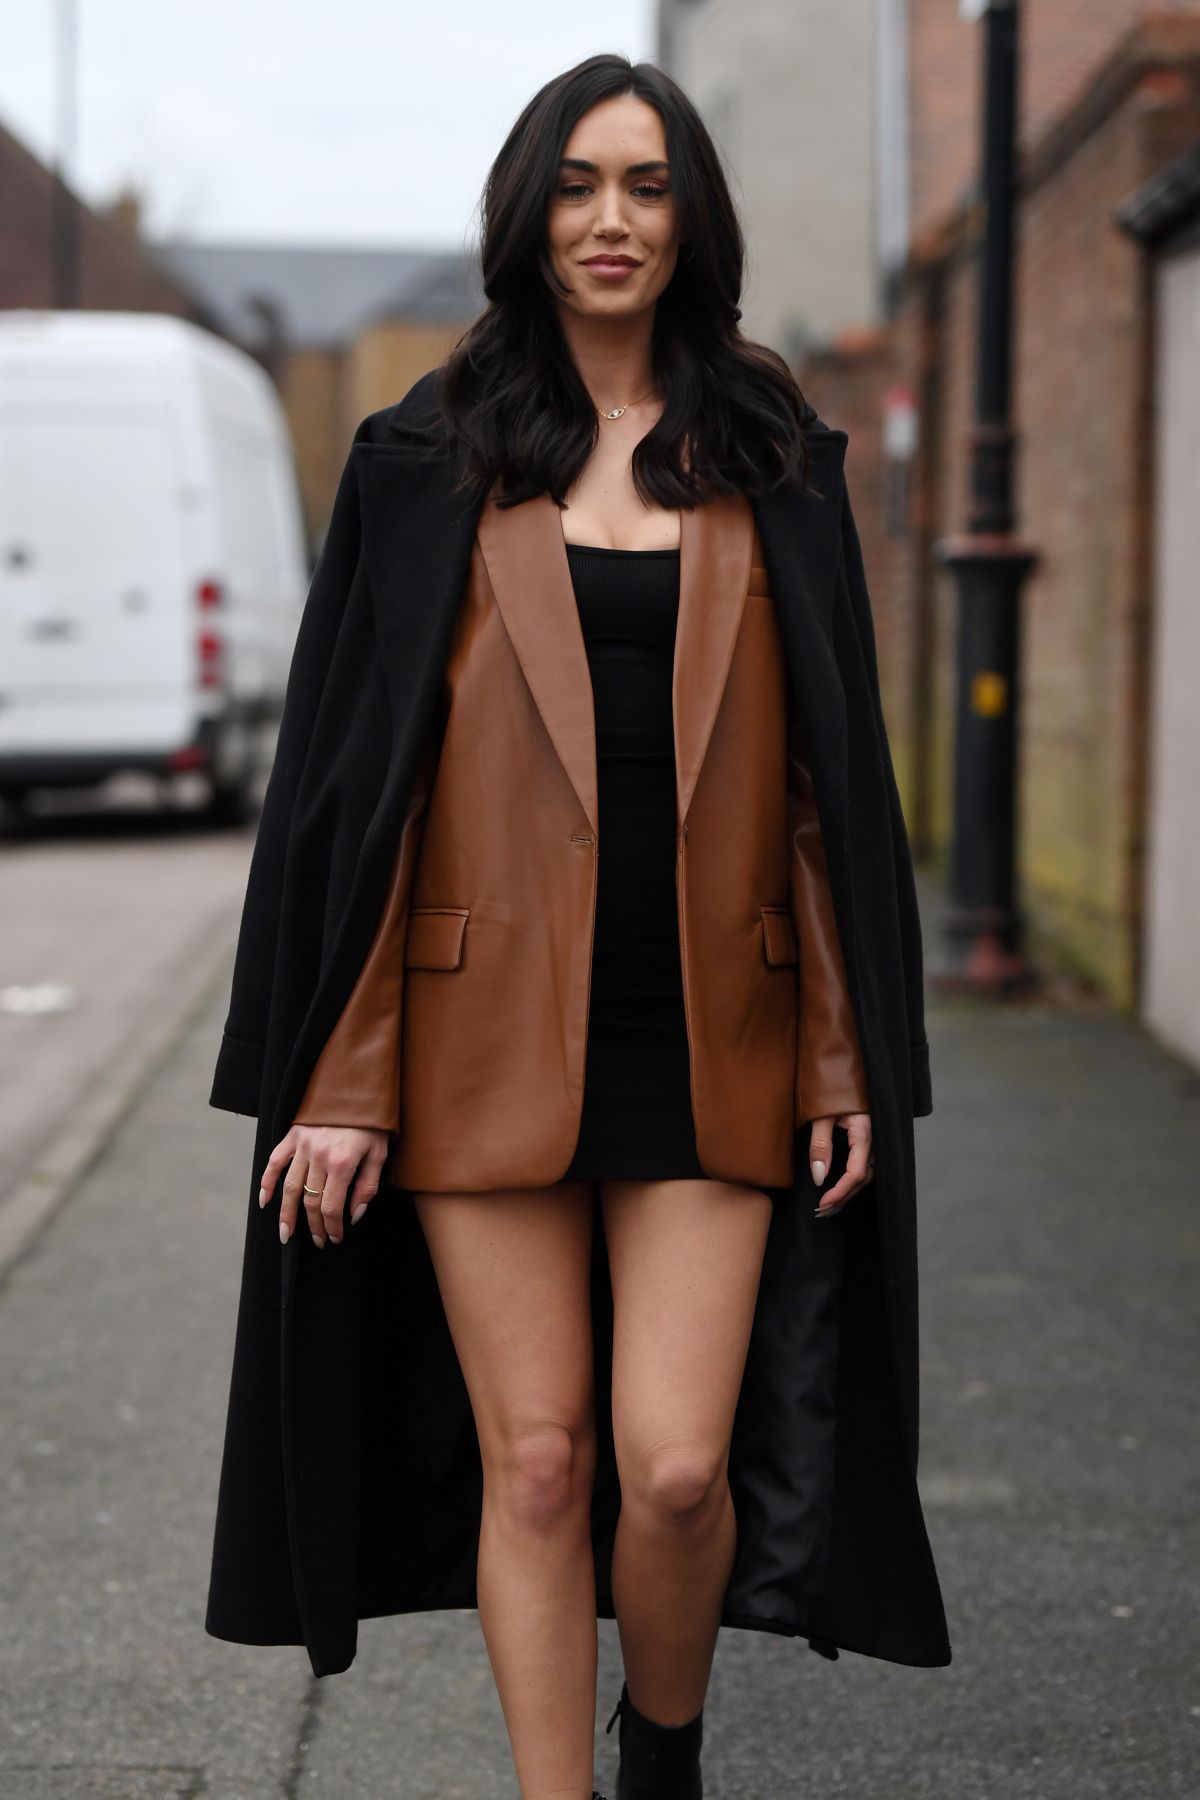 Clelia Theodorou On The Set Of The Only Way Is Essex